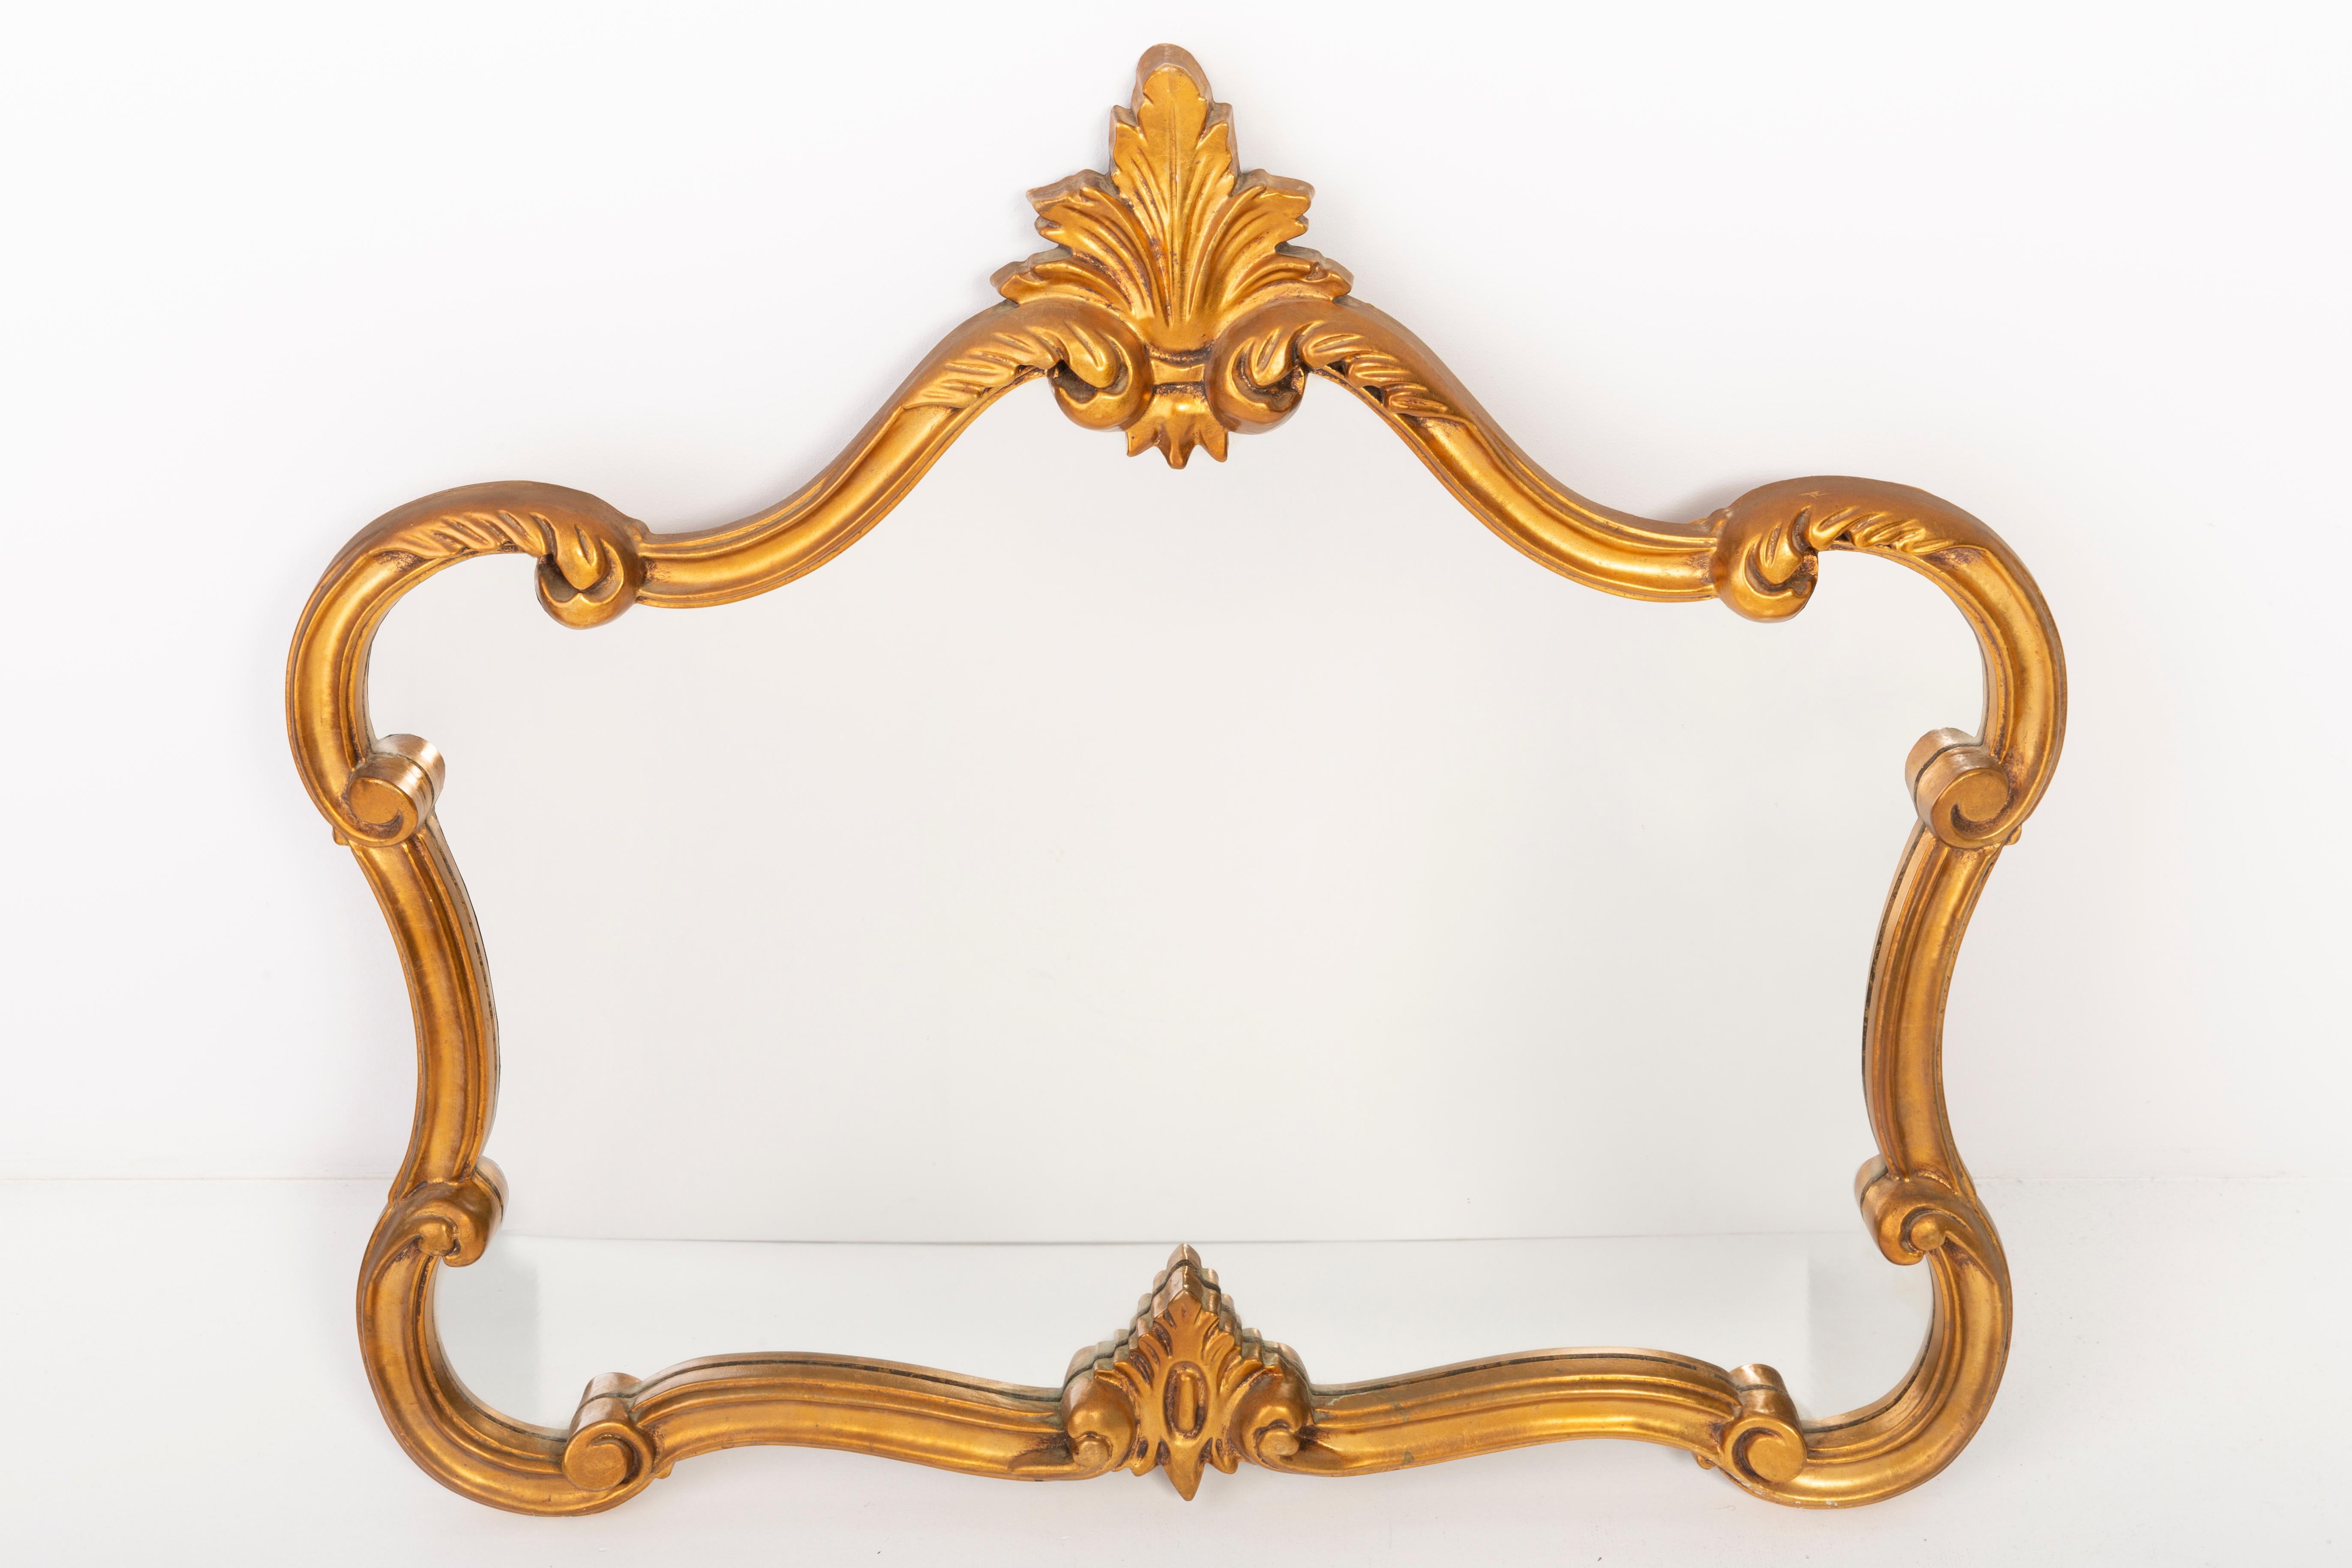 A mirror in a golden decorative frame with flowers. The frame is made of wood. Perfect for bedroom as a decoration over the bed. Mirror is in very good vintage condition, no damage or cracks in the frame. Original glass. Beautiful piece for every